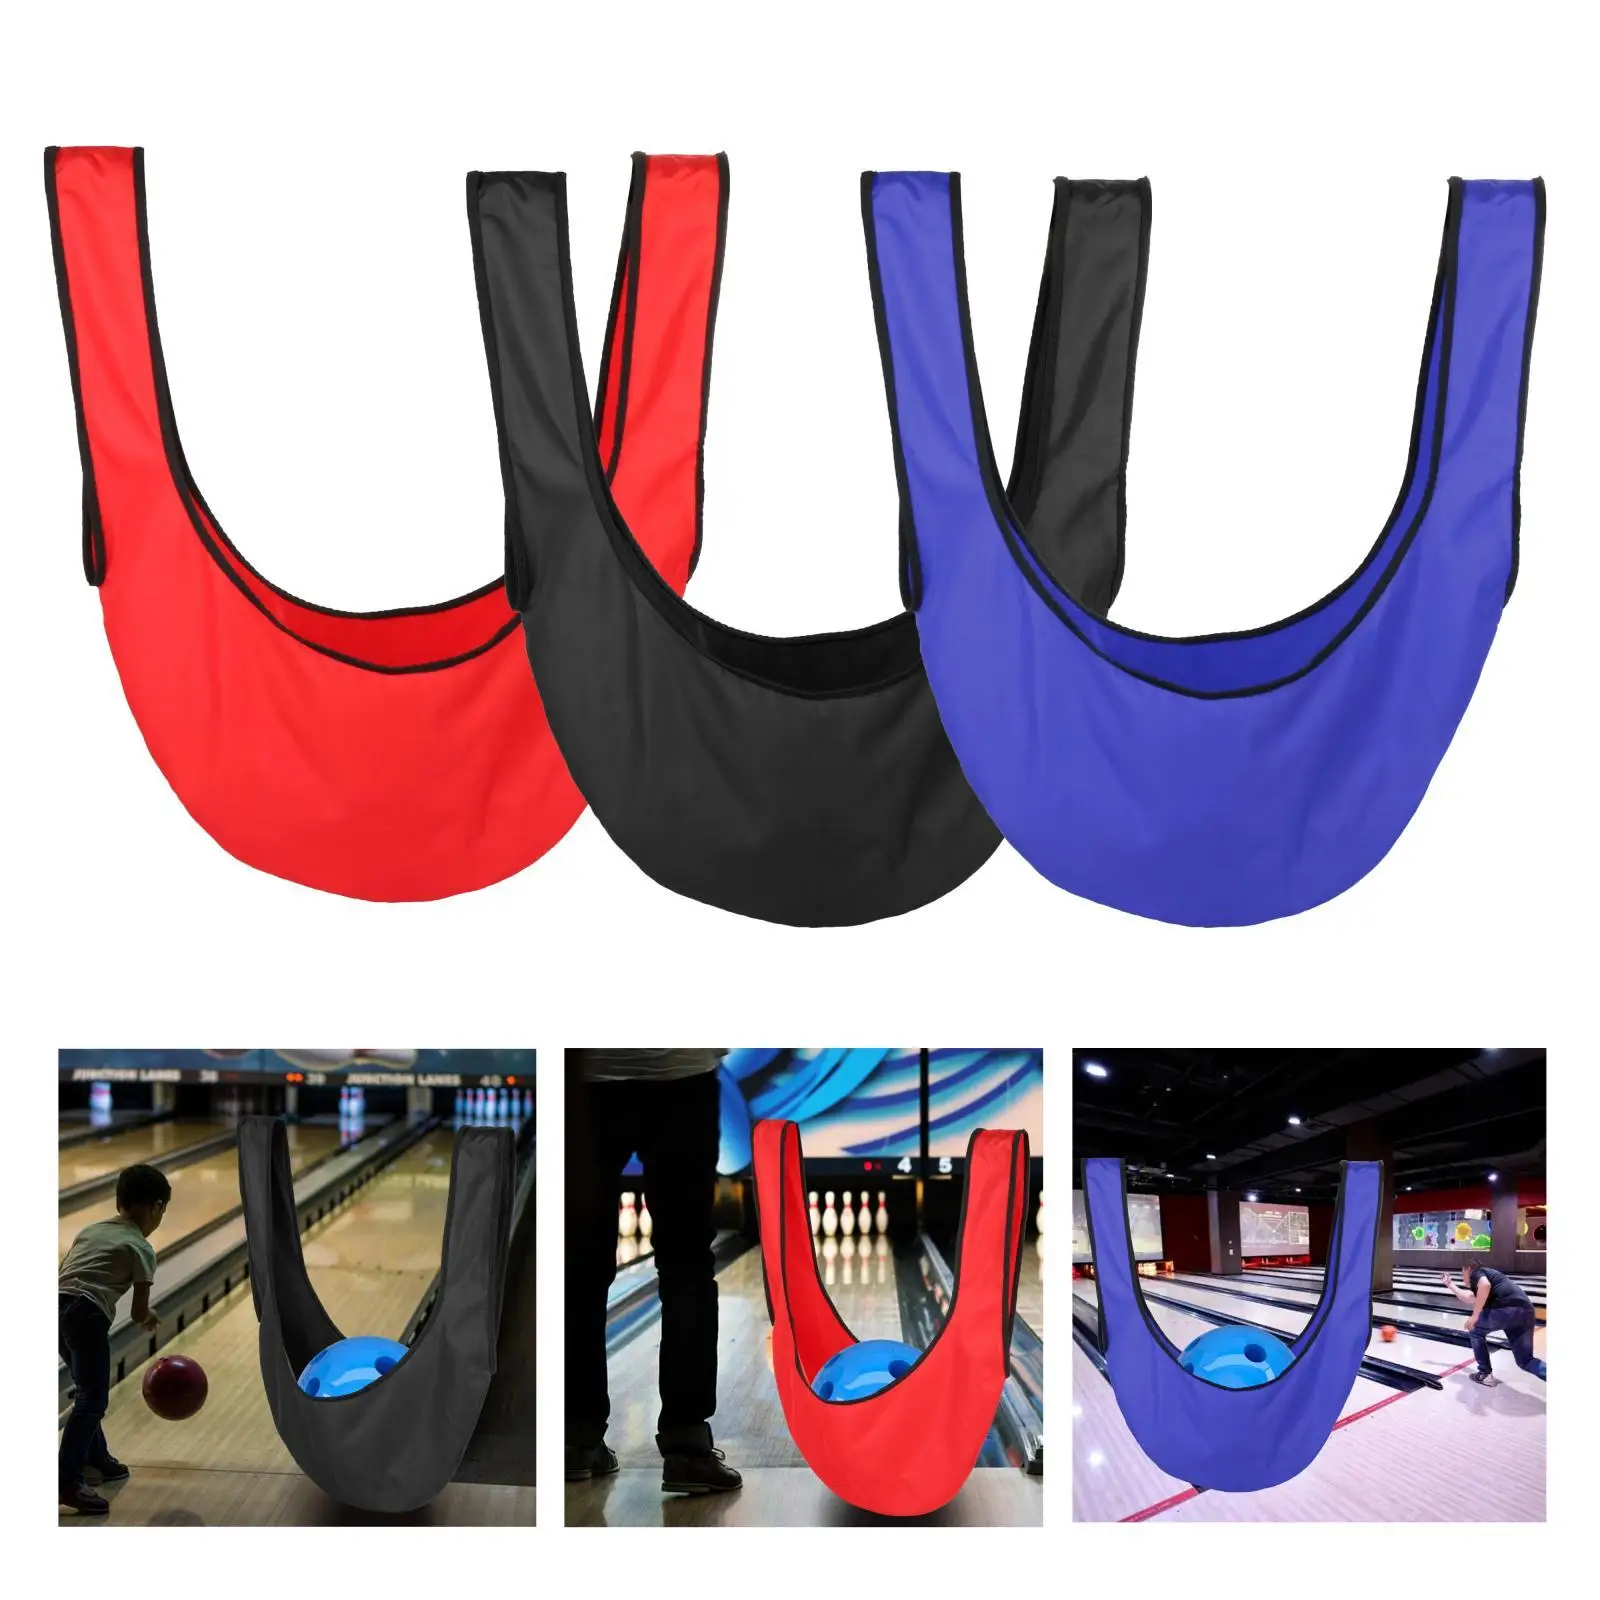  Bag  Carrier Bag Bowl Bowling Cleaner Bag Bowling Seesaw Bag for Gym Equipment Accessories